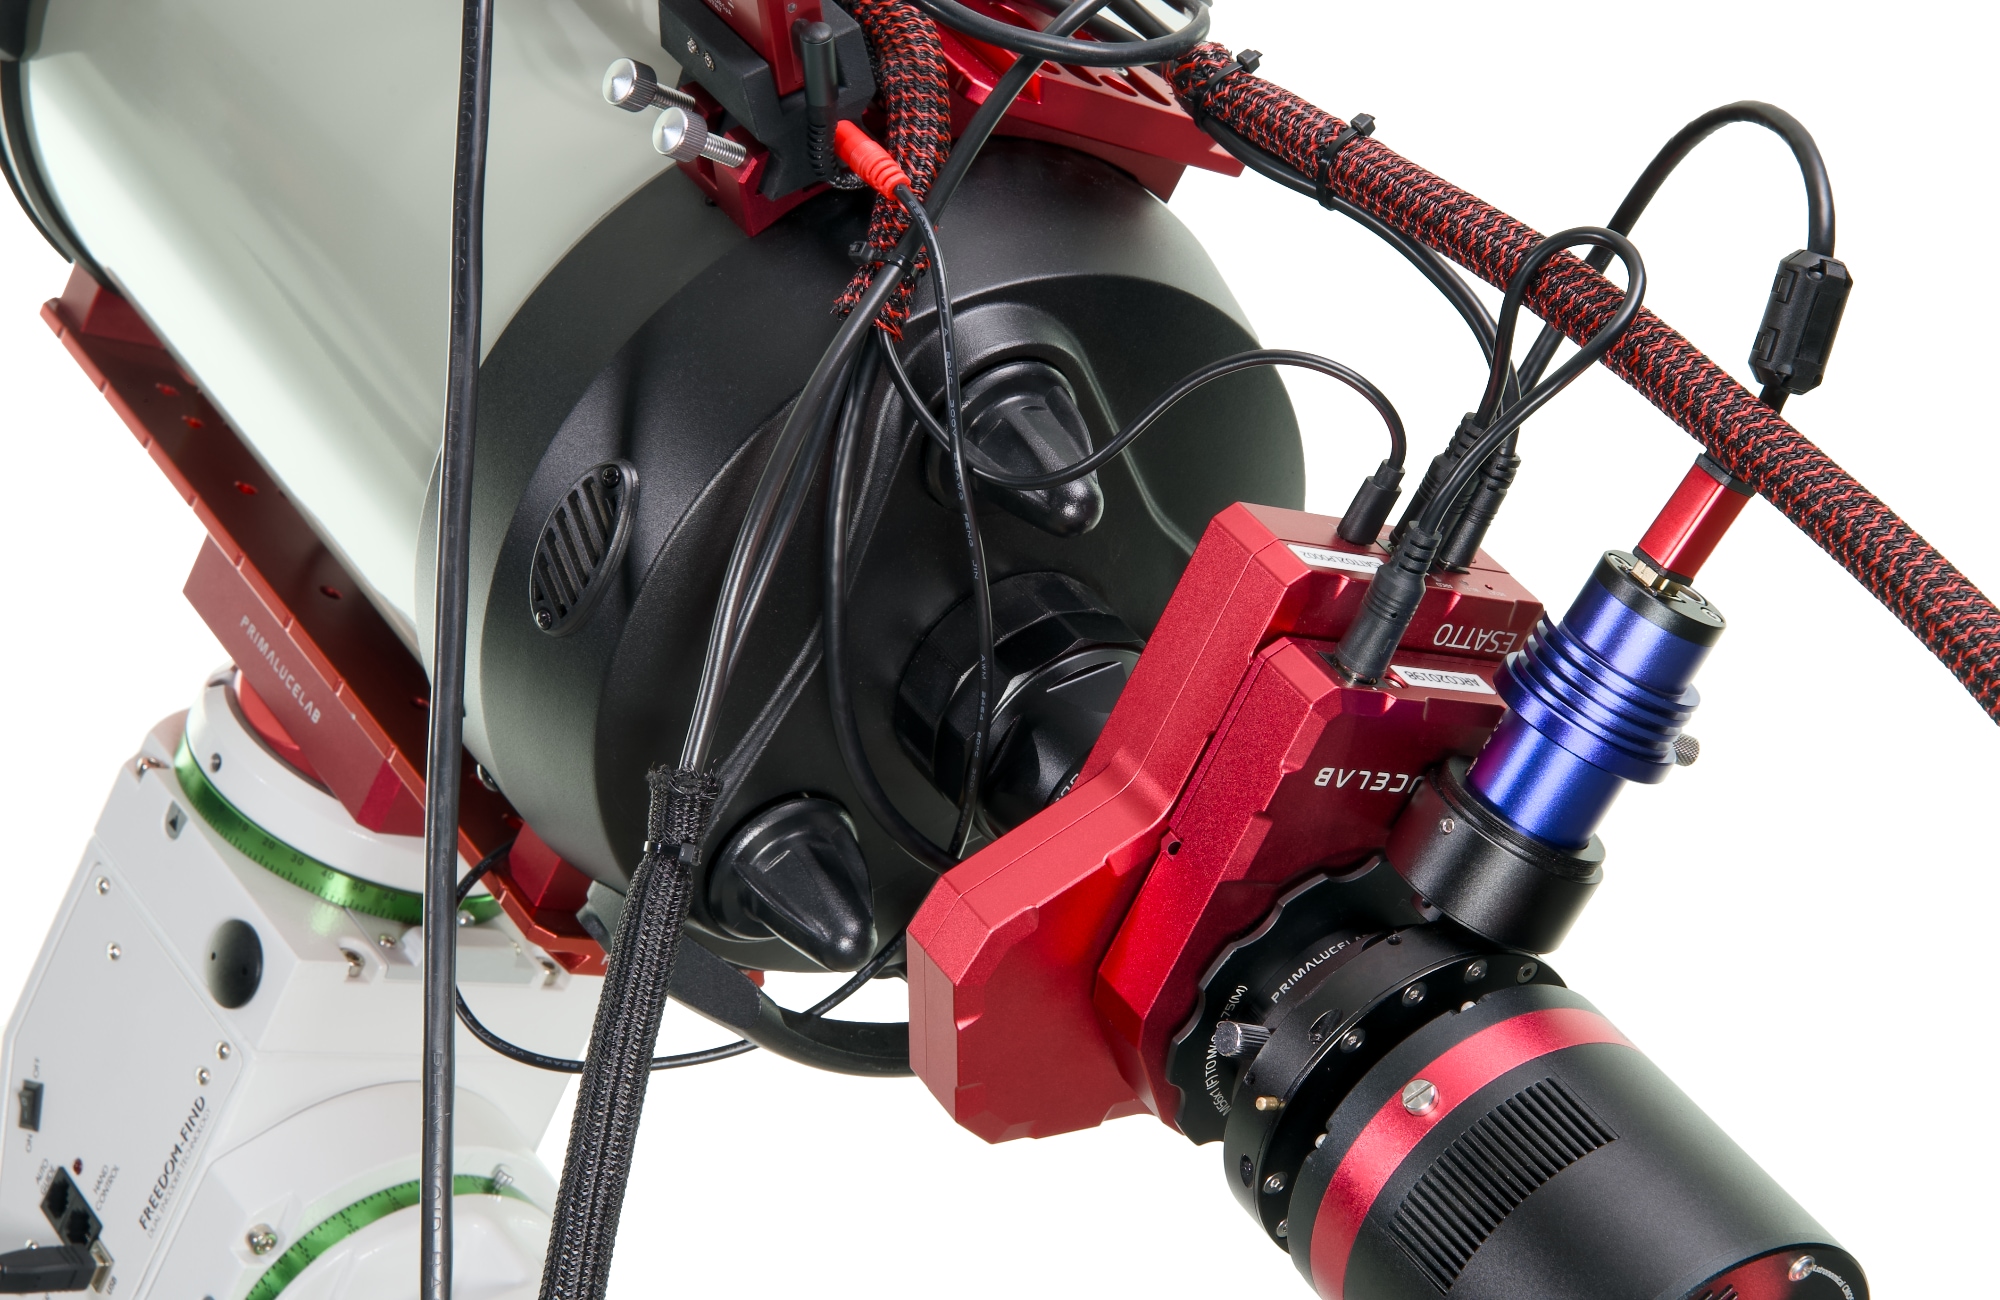 How to provide a rotating focuser to EdgeHD 8” with 0.7x reducer for deep-sky astrophotography